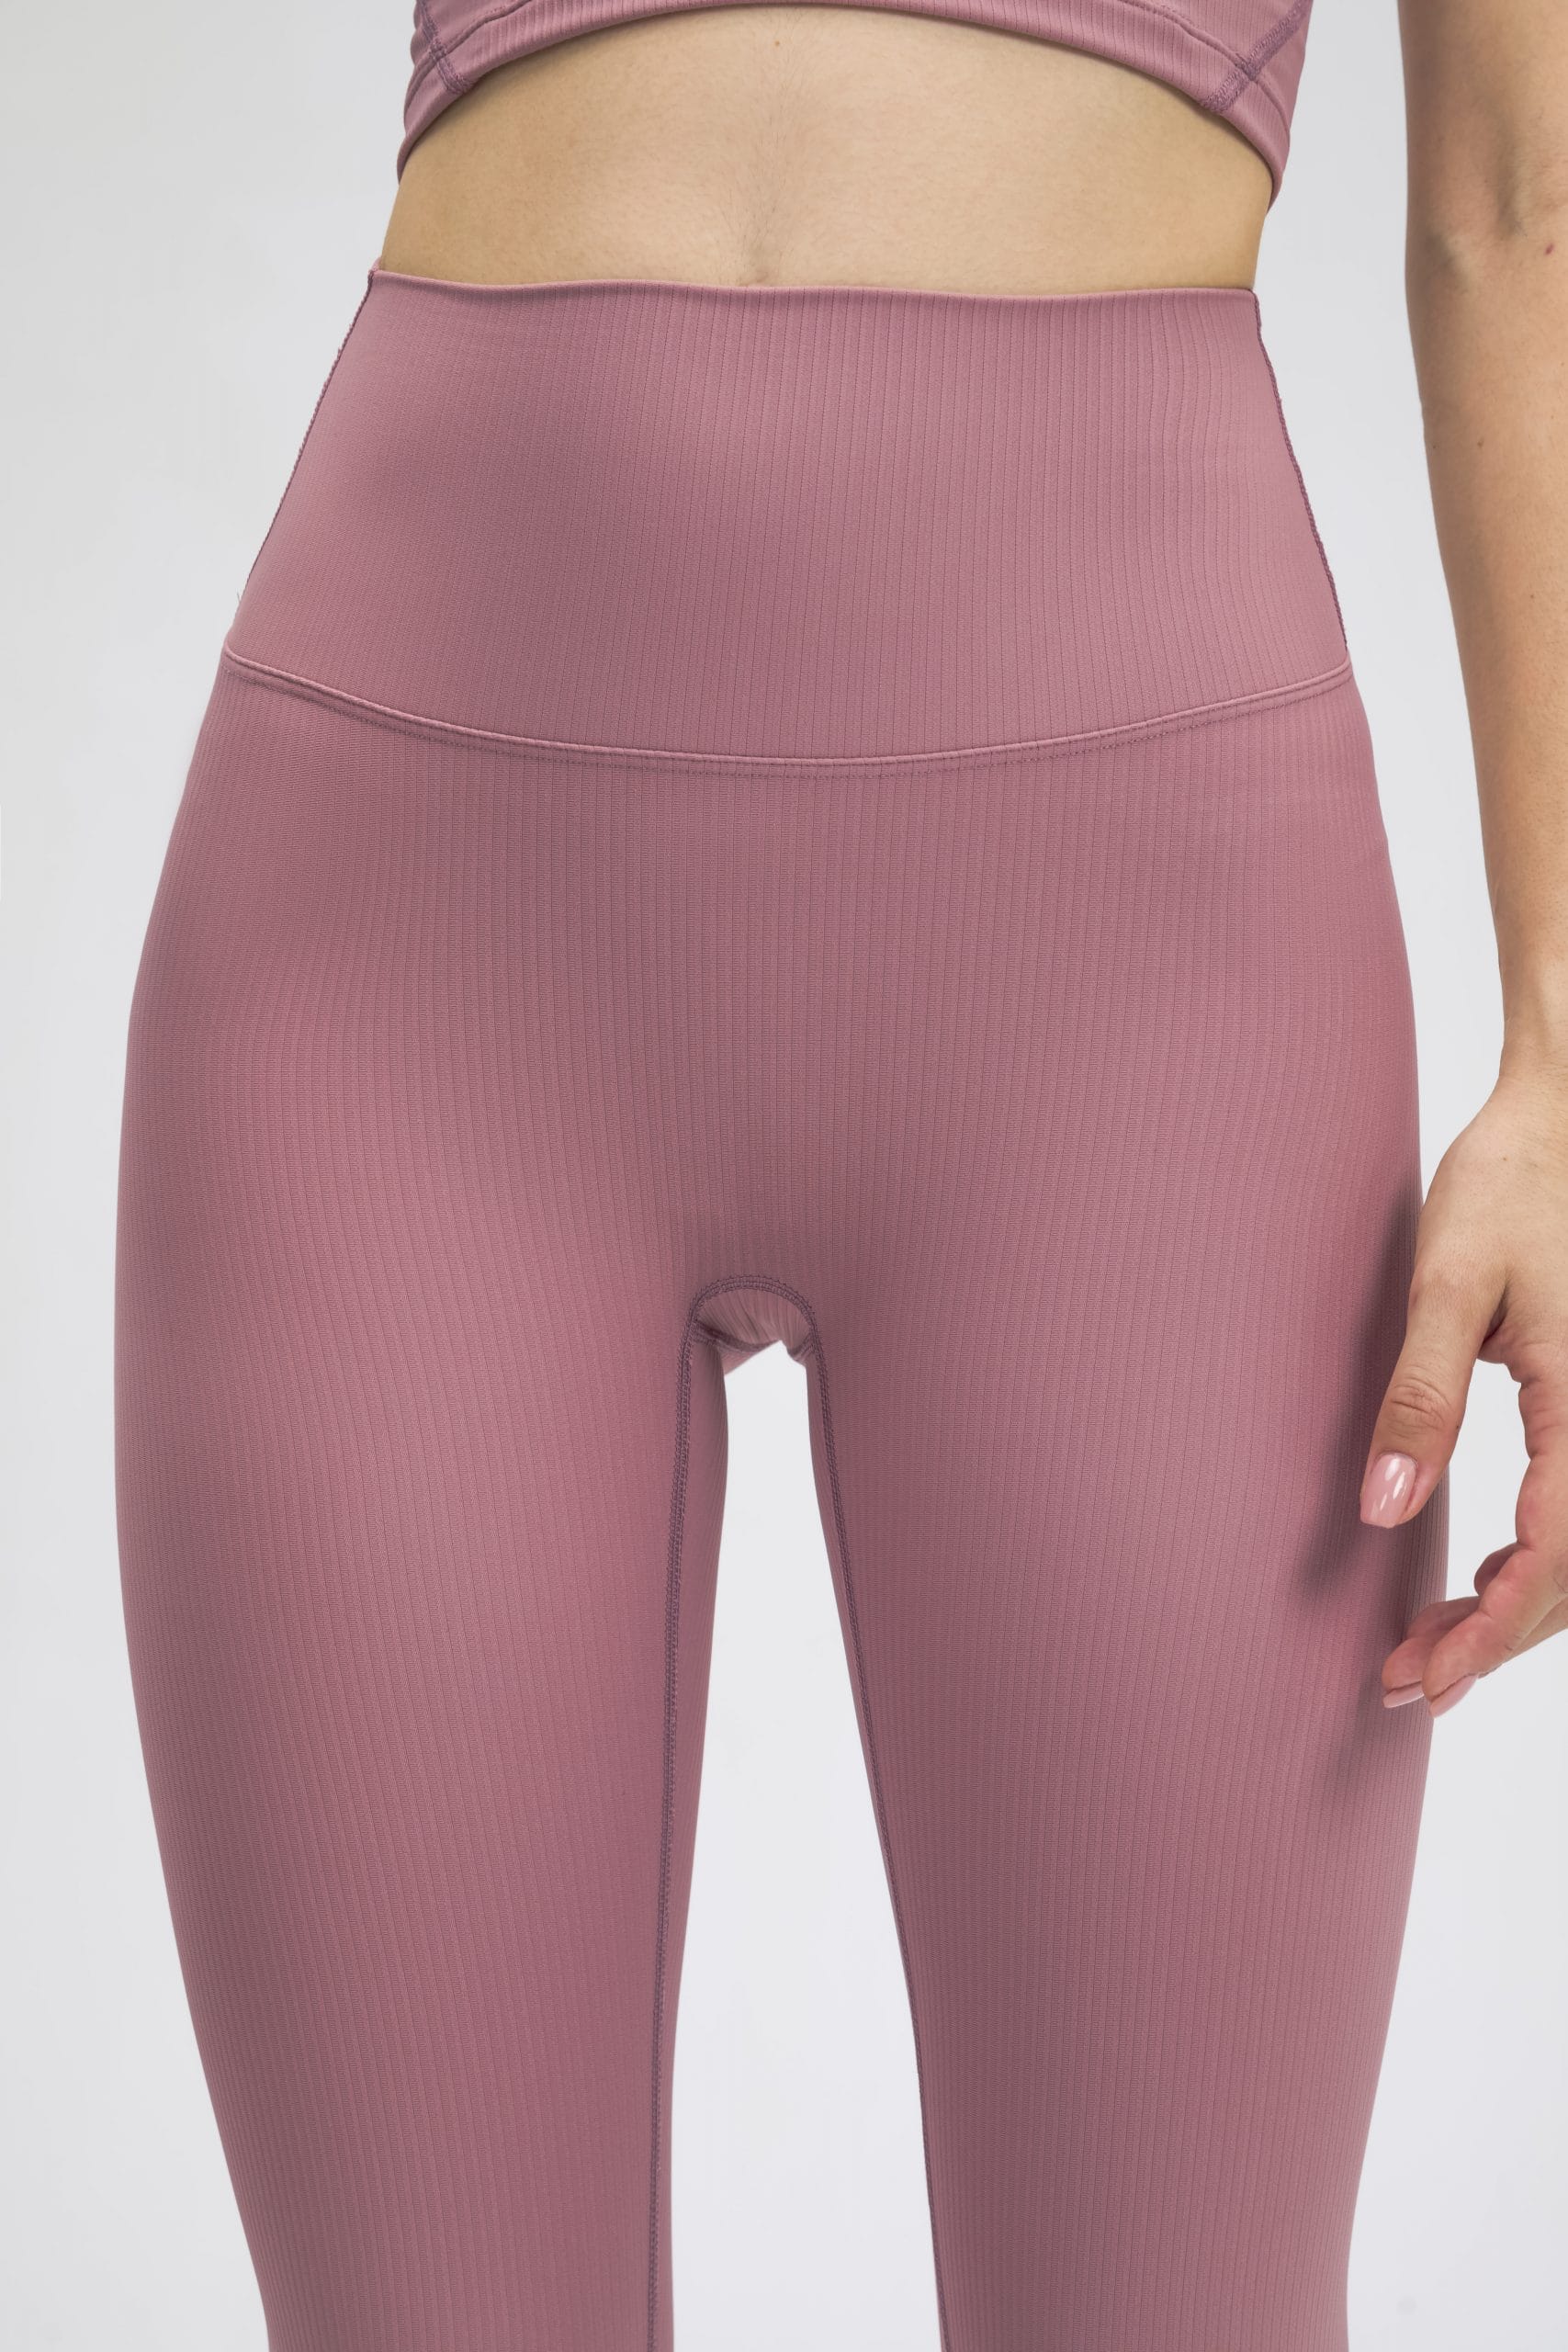 tight short yoga pants, tight short yoga pants Suppliers and